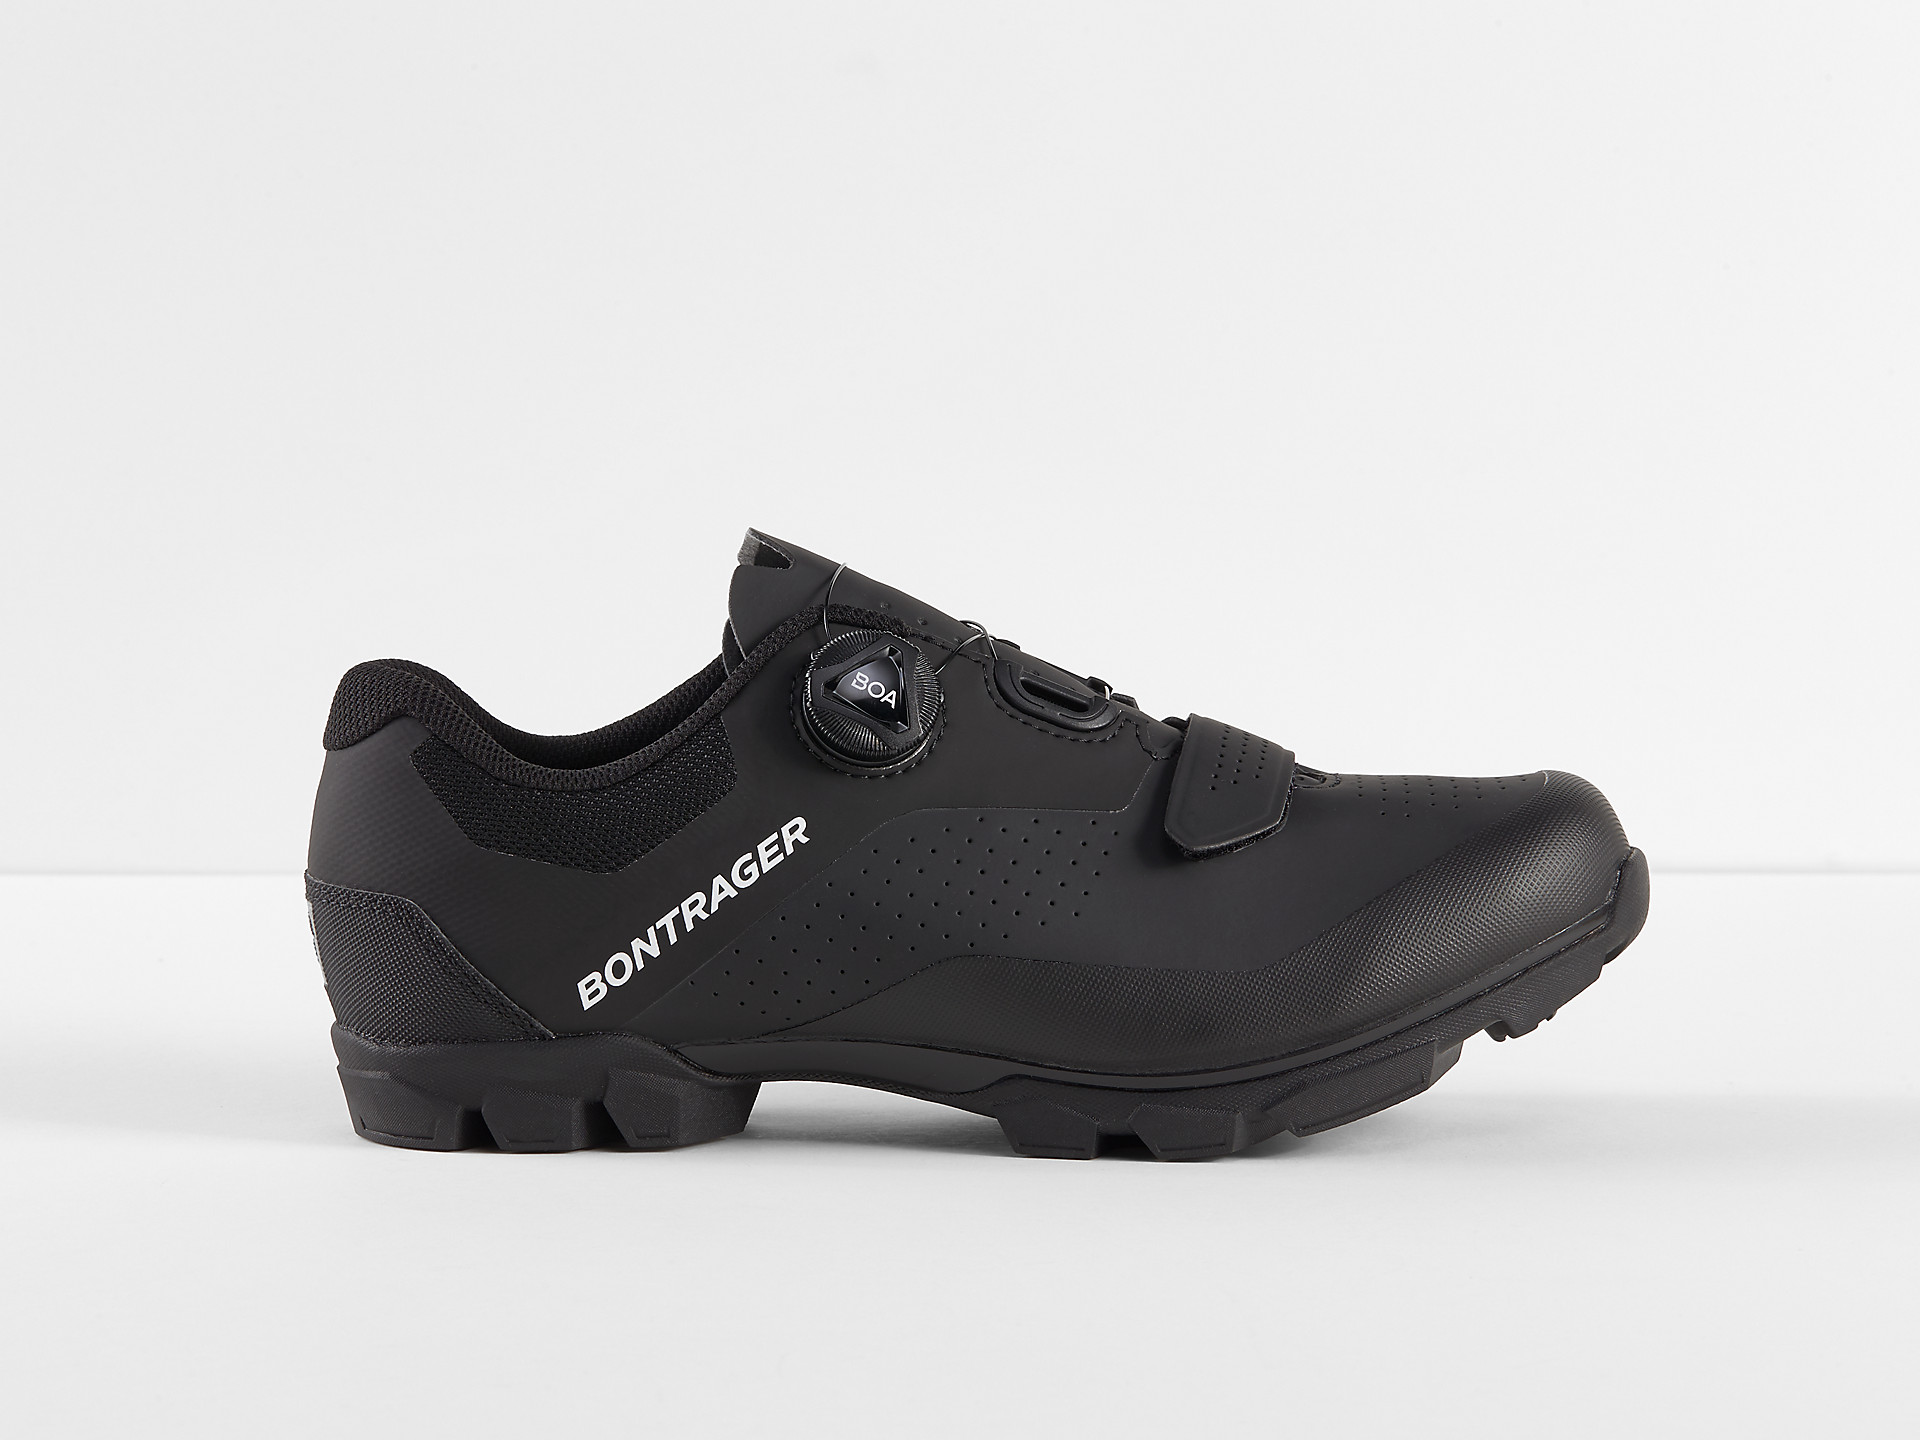 <a href="https://cycles-clement.be/product/bont-chaussures-foray-vtt-42-black/">BONT CHAUSSURES FORAY VTT 42 BLACK</a>